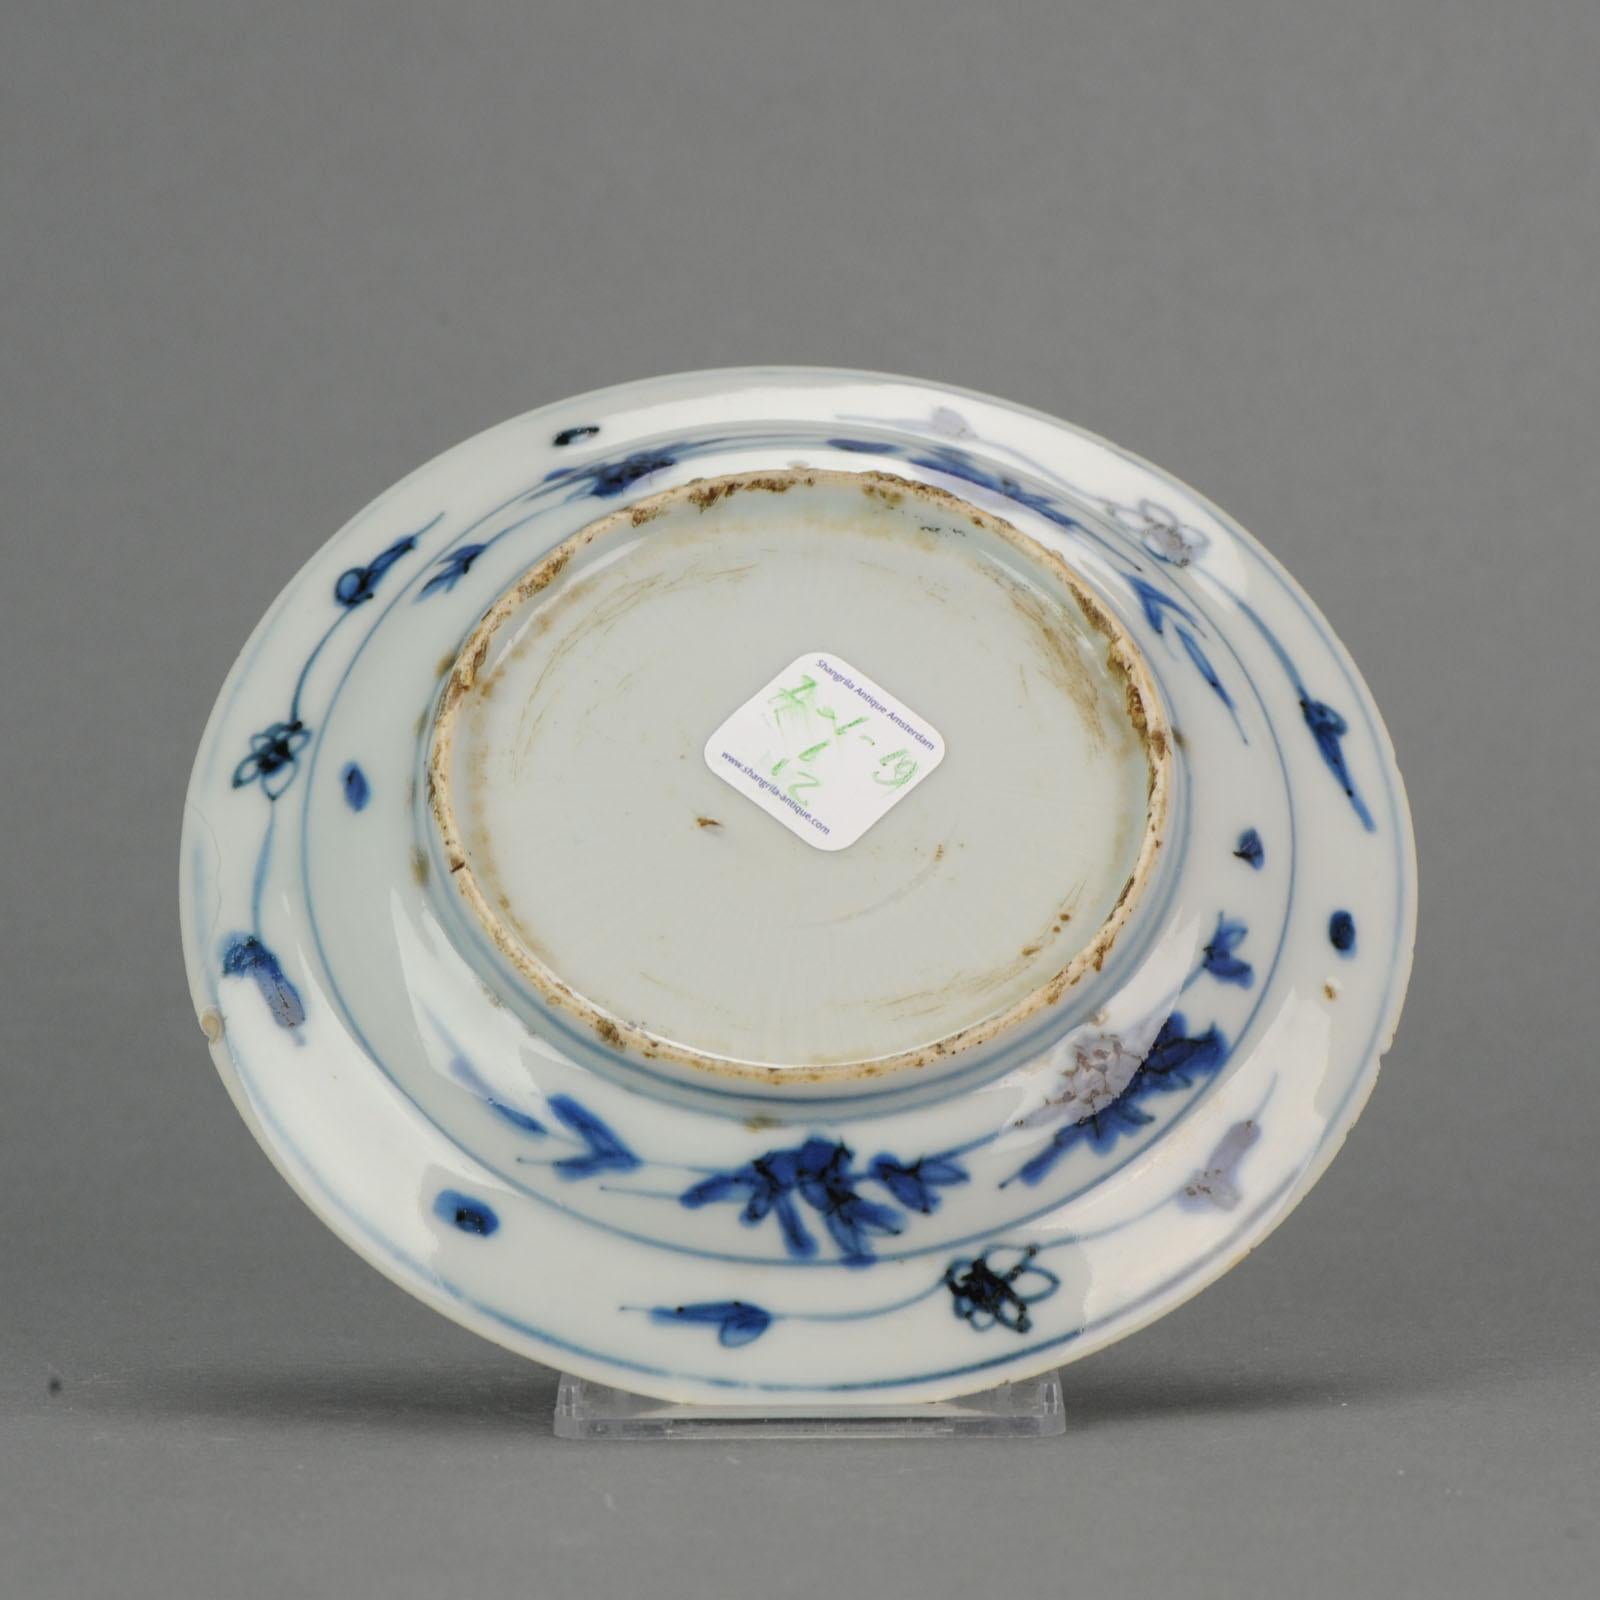 Antique Chinese Porcelain Jiajing/Longqing China Literati Plate, ca 1550-1580 In Good Condition For Sale In Amsterdam, Noord Holland